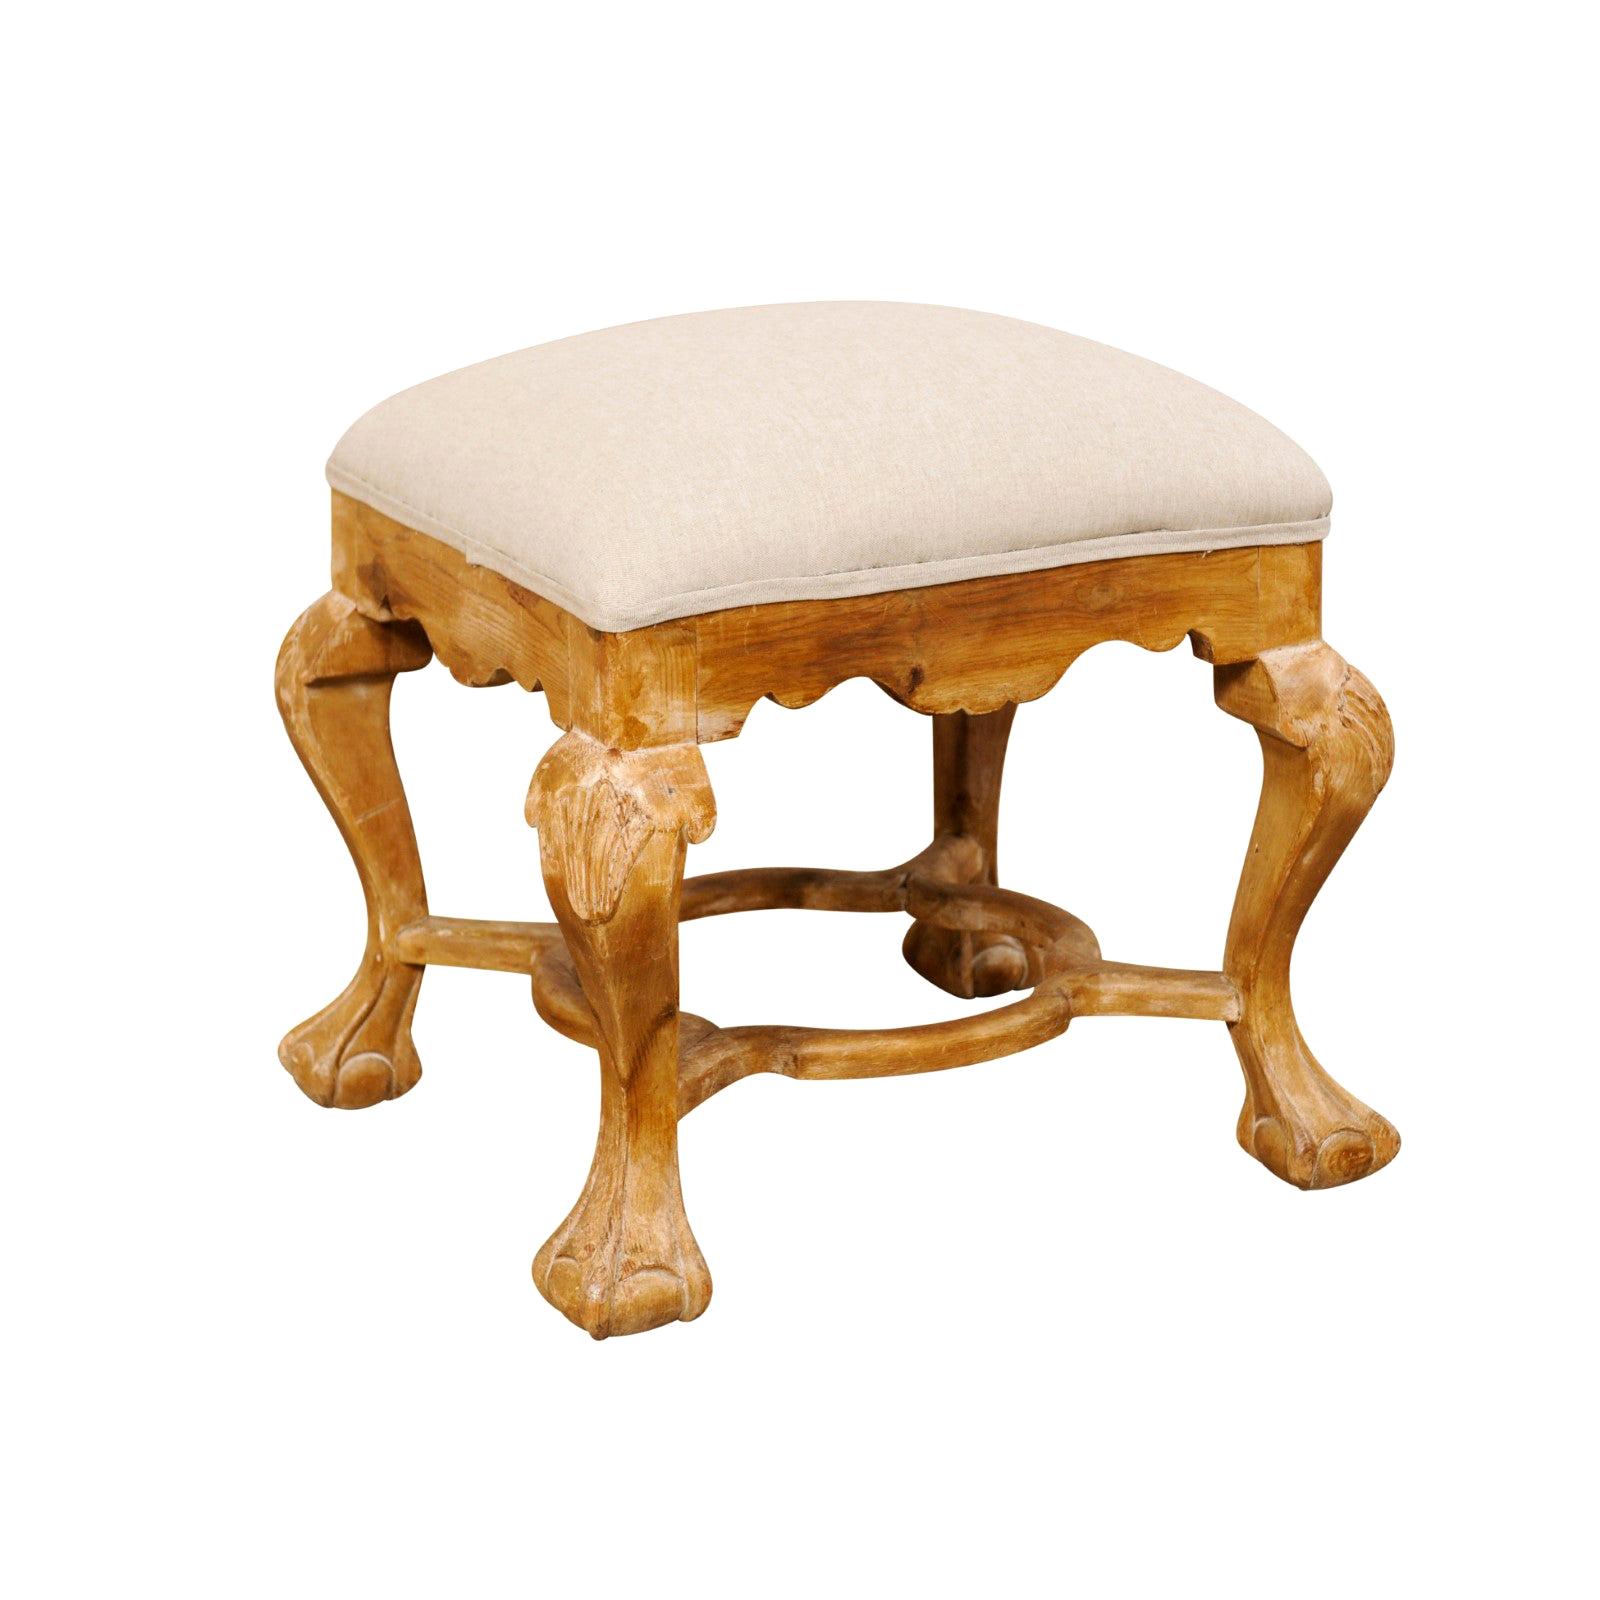 Italian-Style Ottoman with Paw and Ball Feet